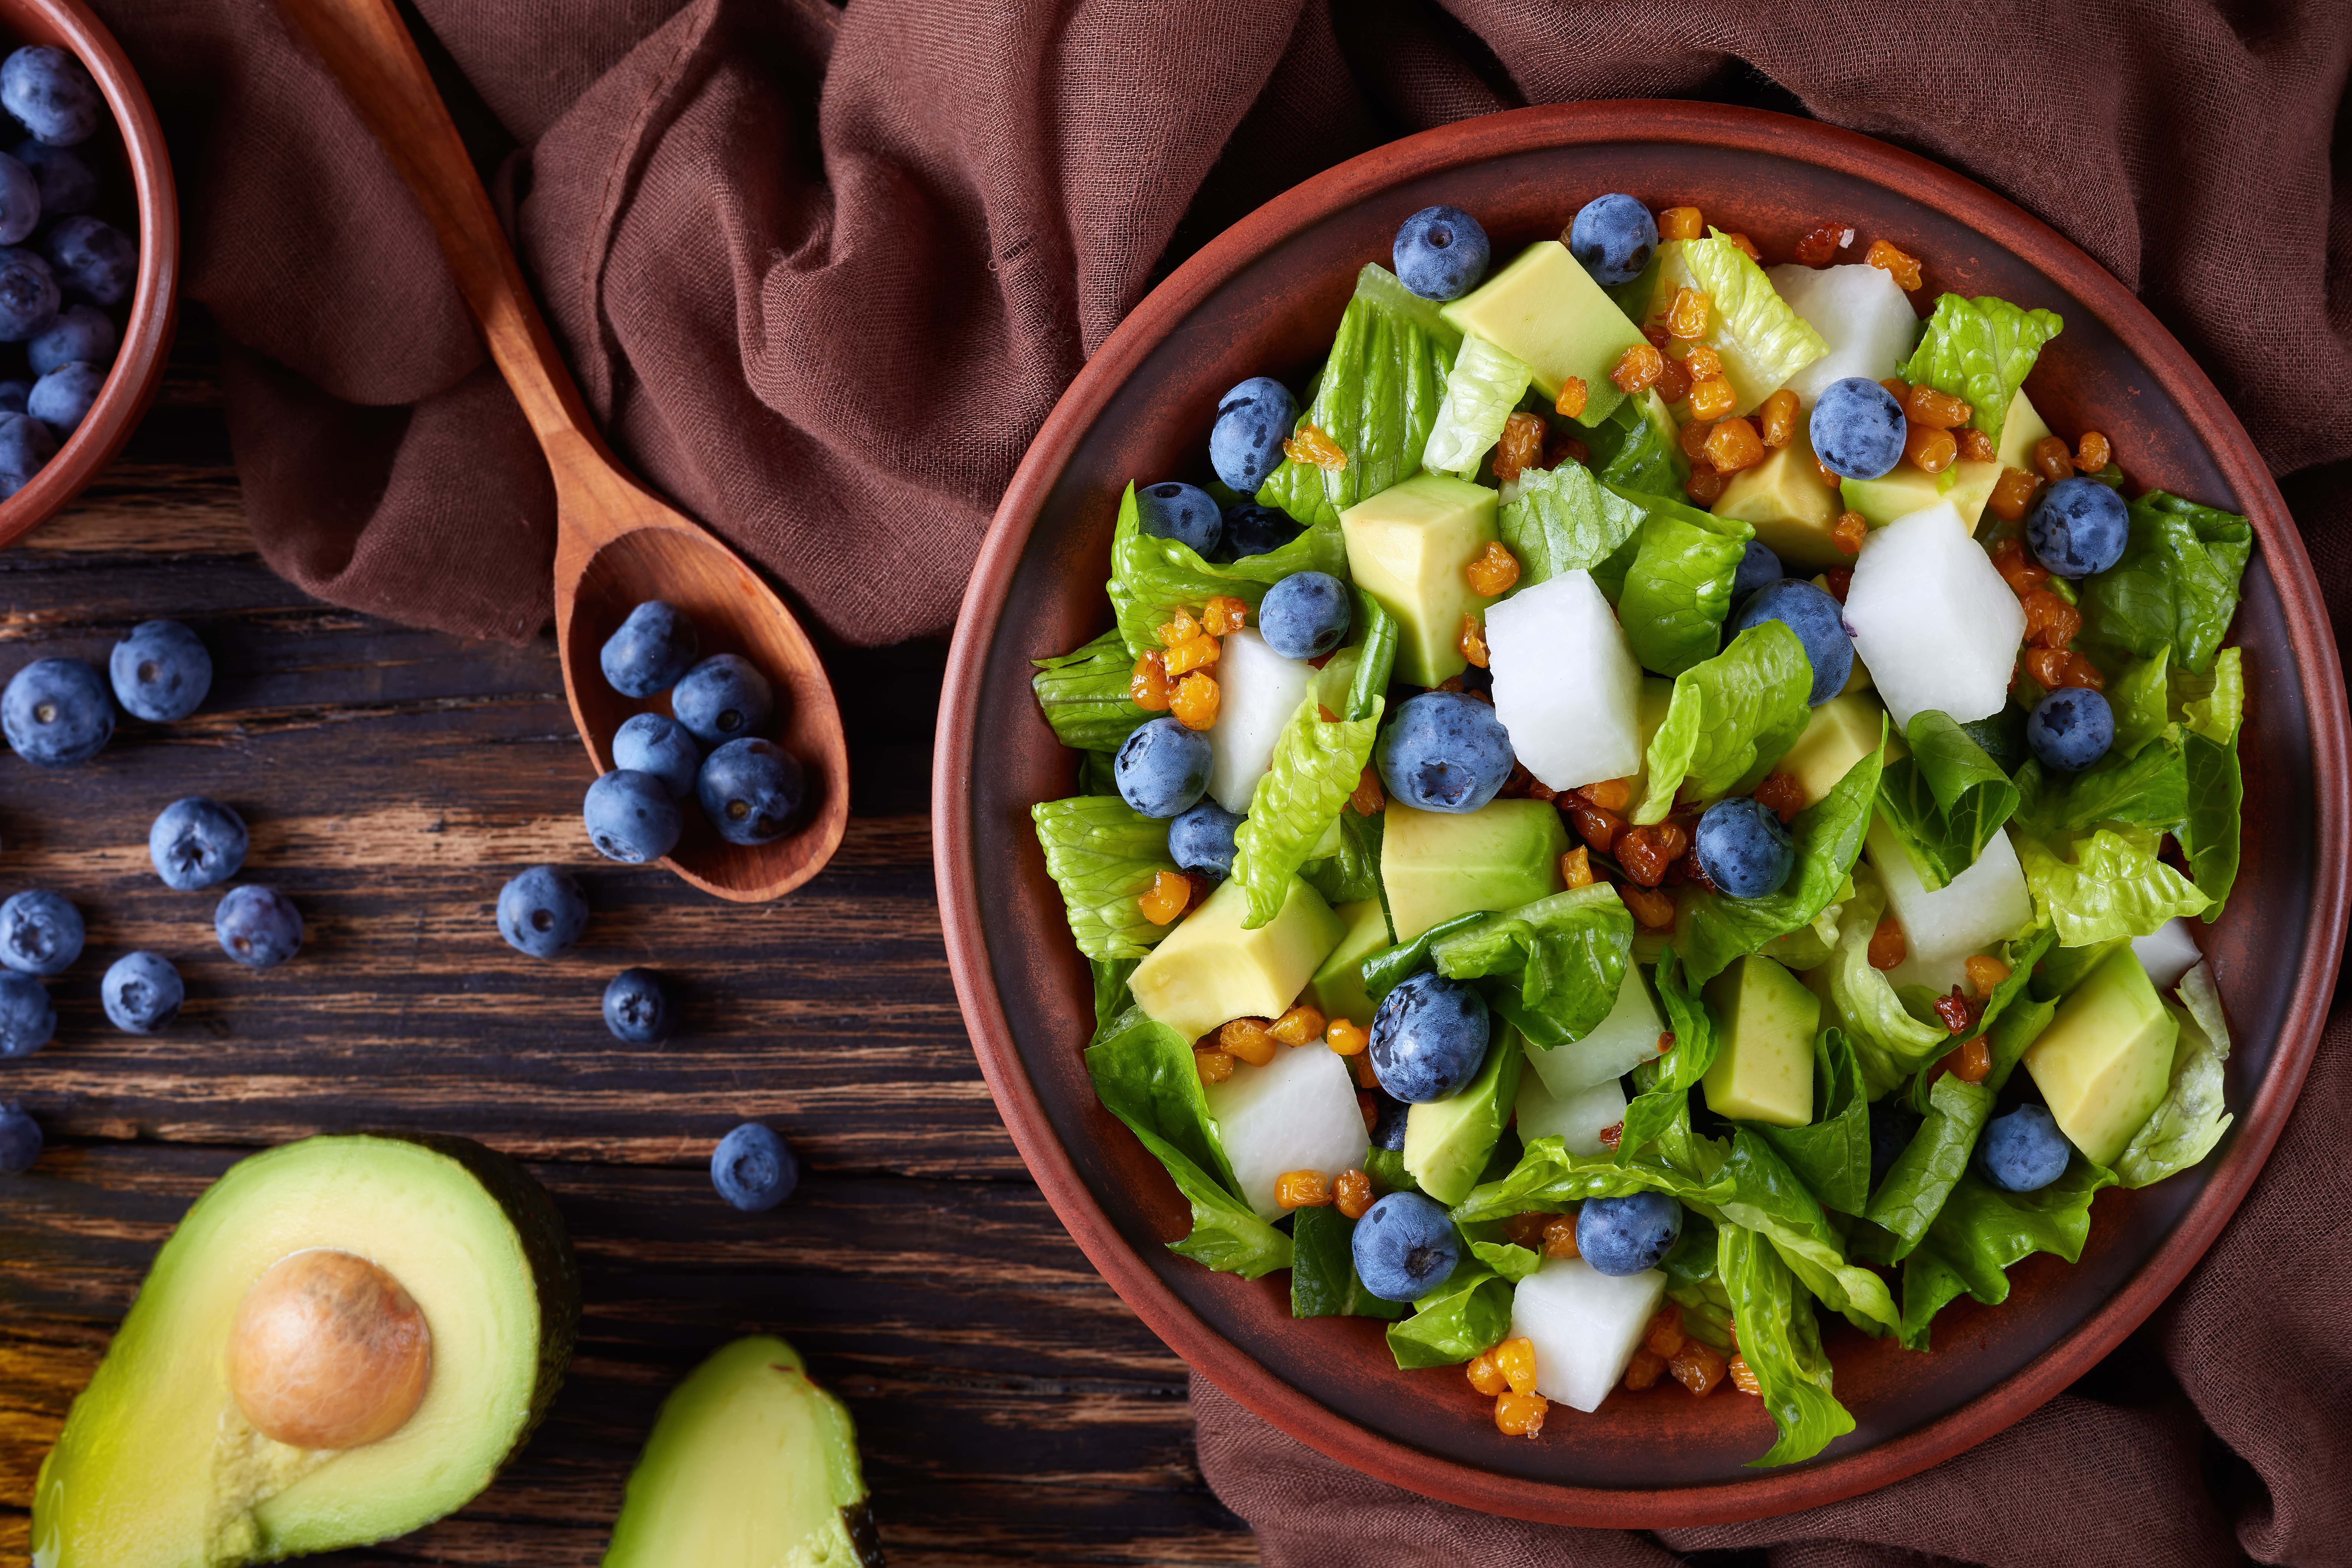 Salad with blueberries and jicama